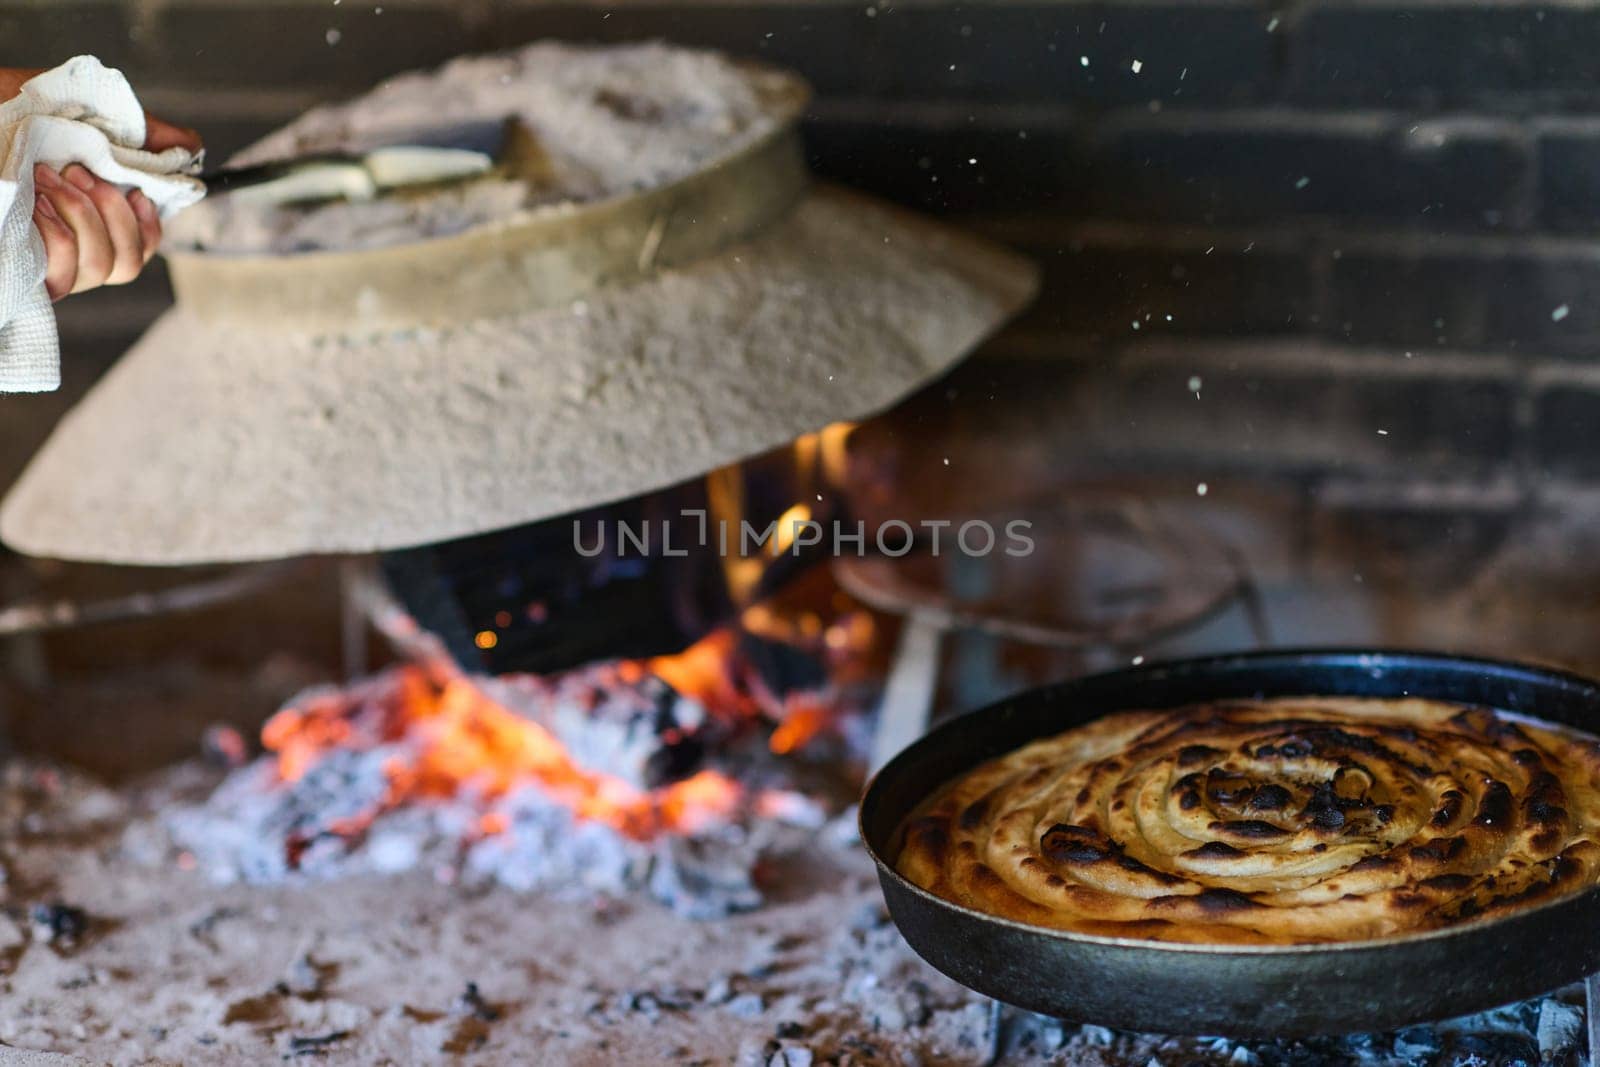 Capturing the essence of Bosnian culinary tradition, step-by-step preparation of a traditional Bosnian pie, showcasing the meticulous craftsmanship and authentic flavors involved in the culinary journey by dotshock